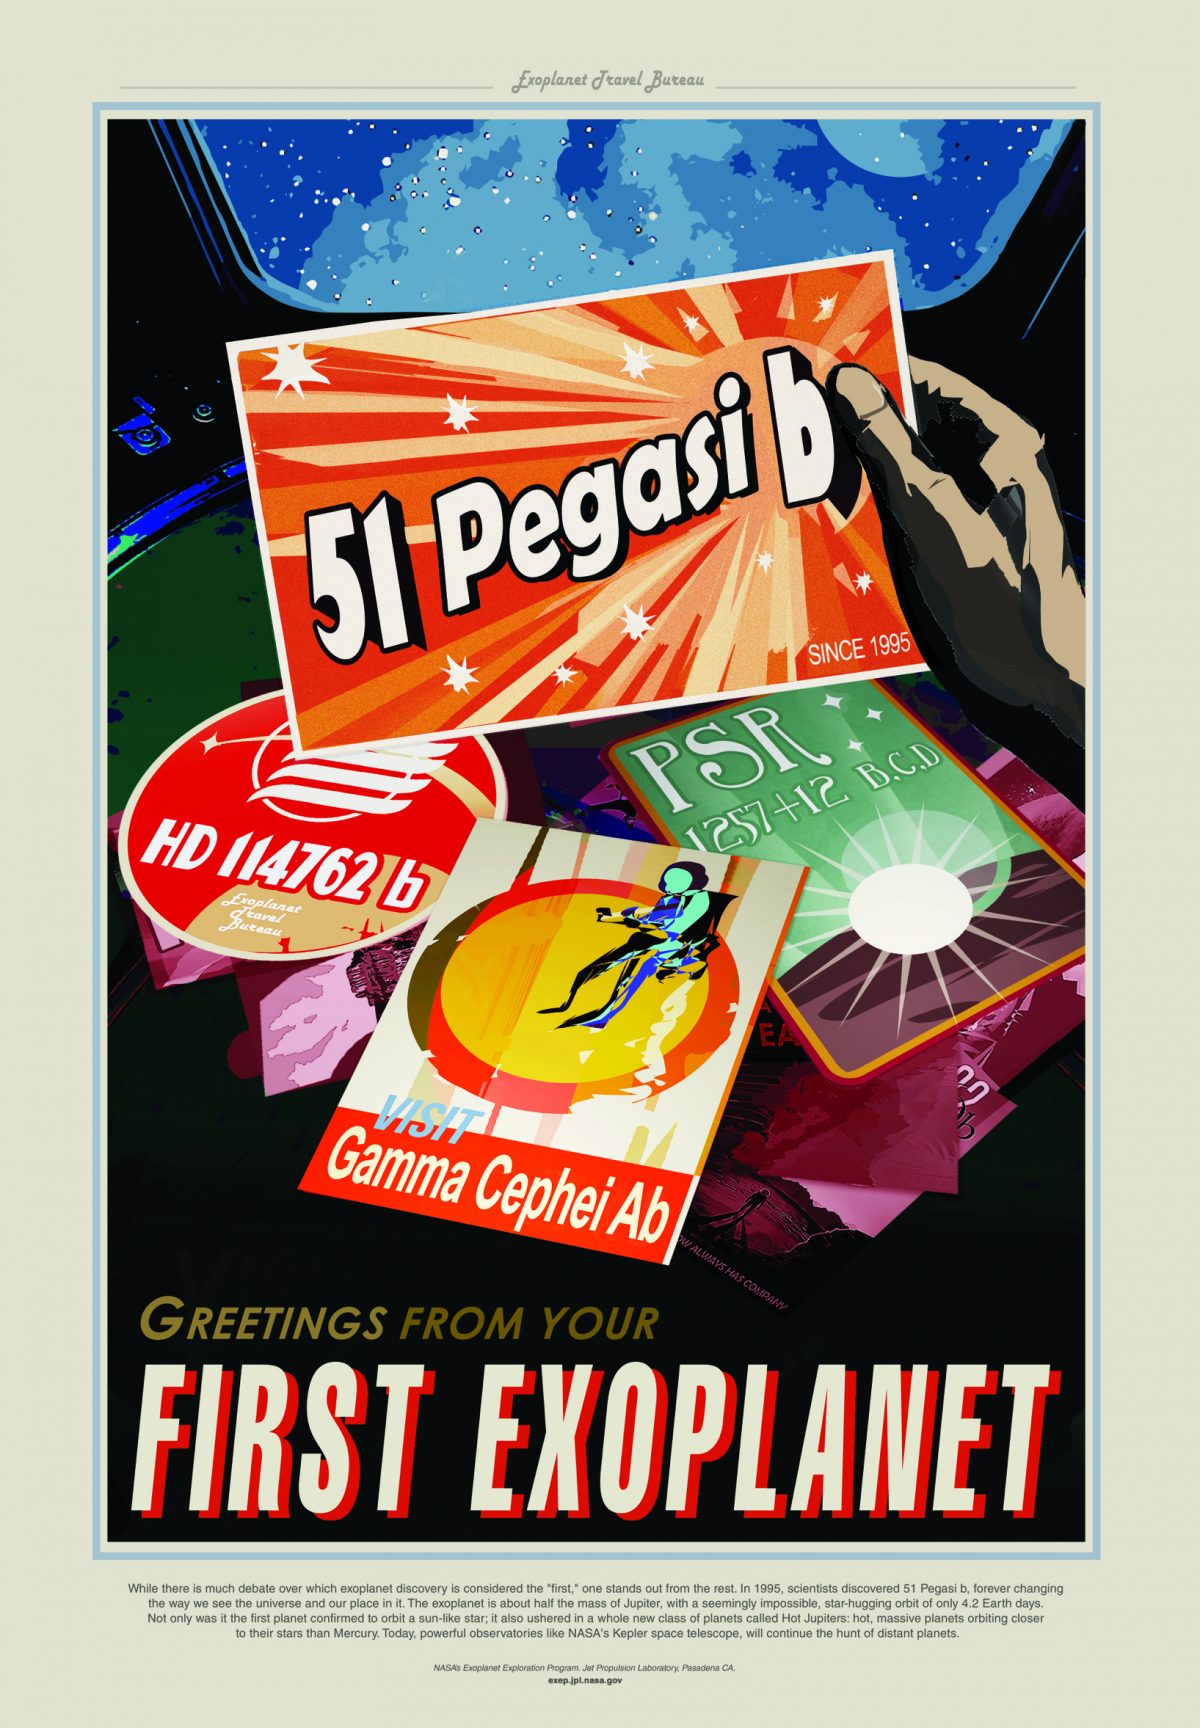 While there is much debate over which exoplanet discovery is considered the "first," one stands out from the rest. In 1995, scientists discovered 51 Pegasi b, forever changing the way we see the universe and our place in it. The exoplanet is about half the mass of Jupiter, with a seemingly impossible, star-hugging orbit of only 4.2 Earth days. Not only was it the first planet confirmed to orbit a sun-like star, it also ushered in a whole new class of planets called Hot Jupiters: hot, massive planets orbiting closer to their stars than Mercury. Today, powerful observatories like NASA's Kepler space telescope will continue the hunt of distant planets.